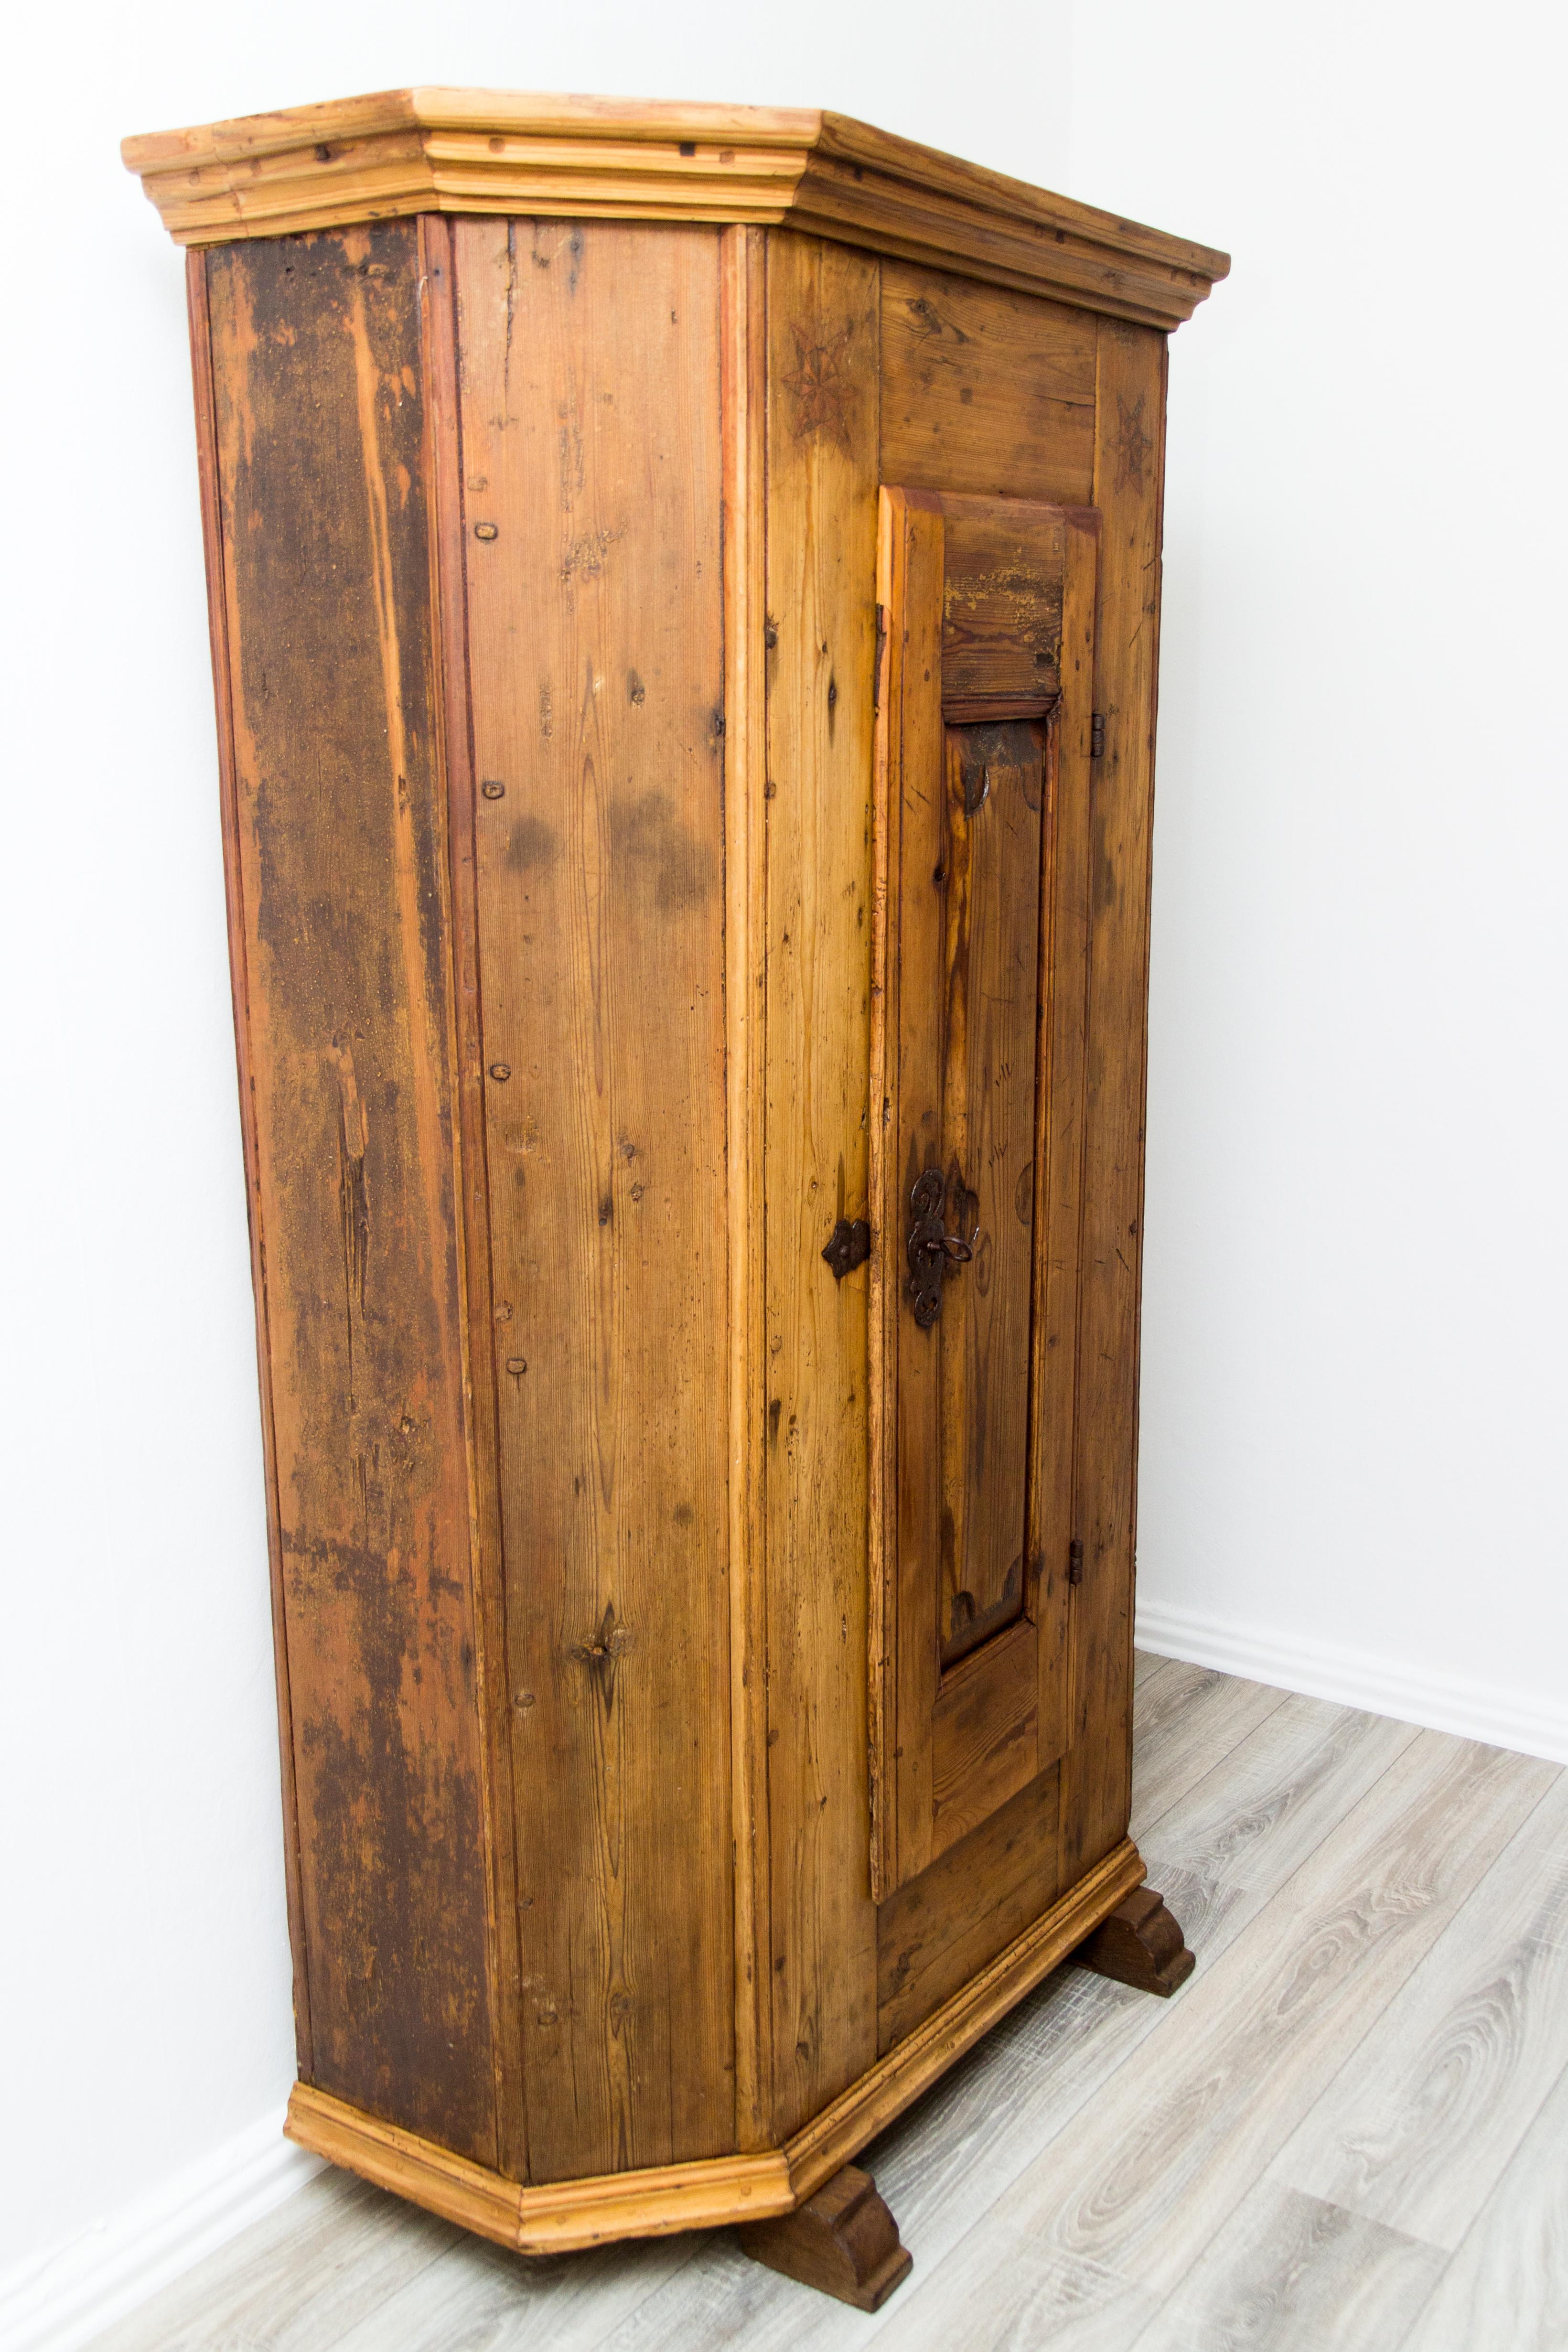 Country Antique One-Door Baltic Pine Wood and Iron Handmade Armoire, dated 1830 For Sale